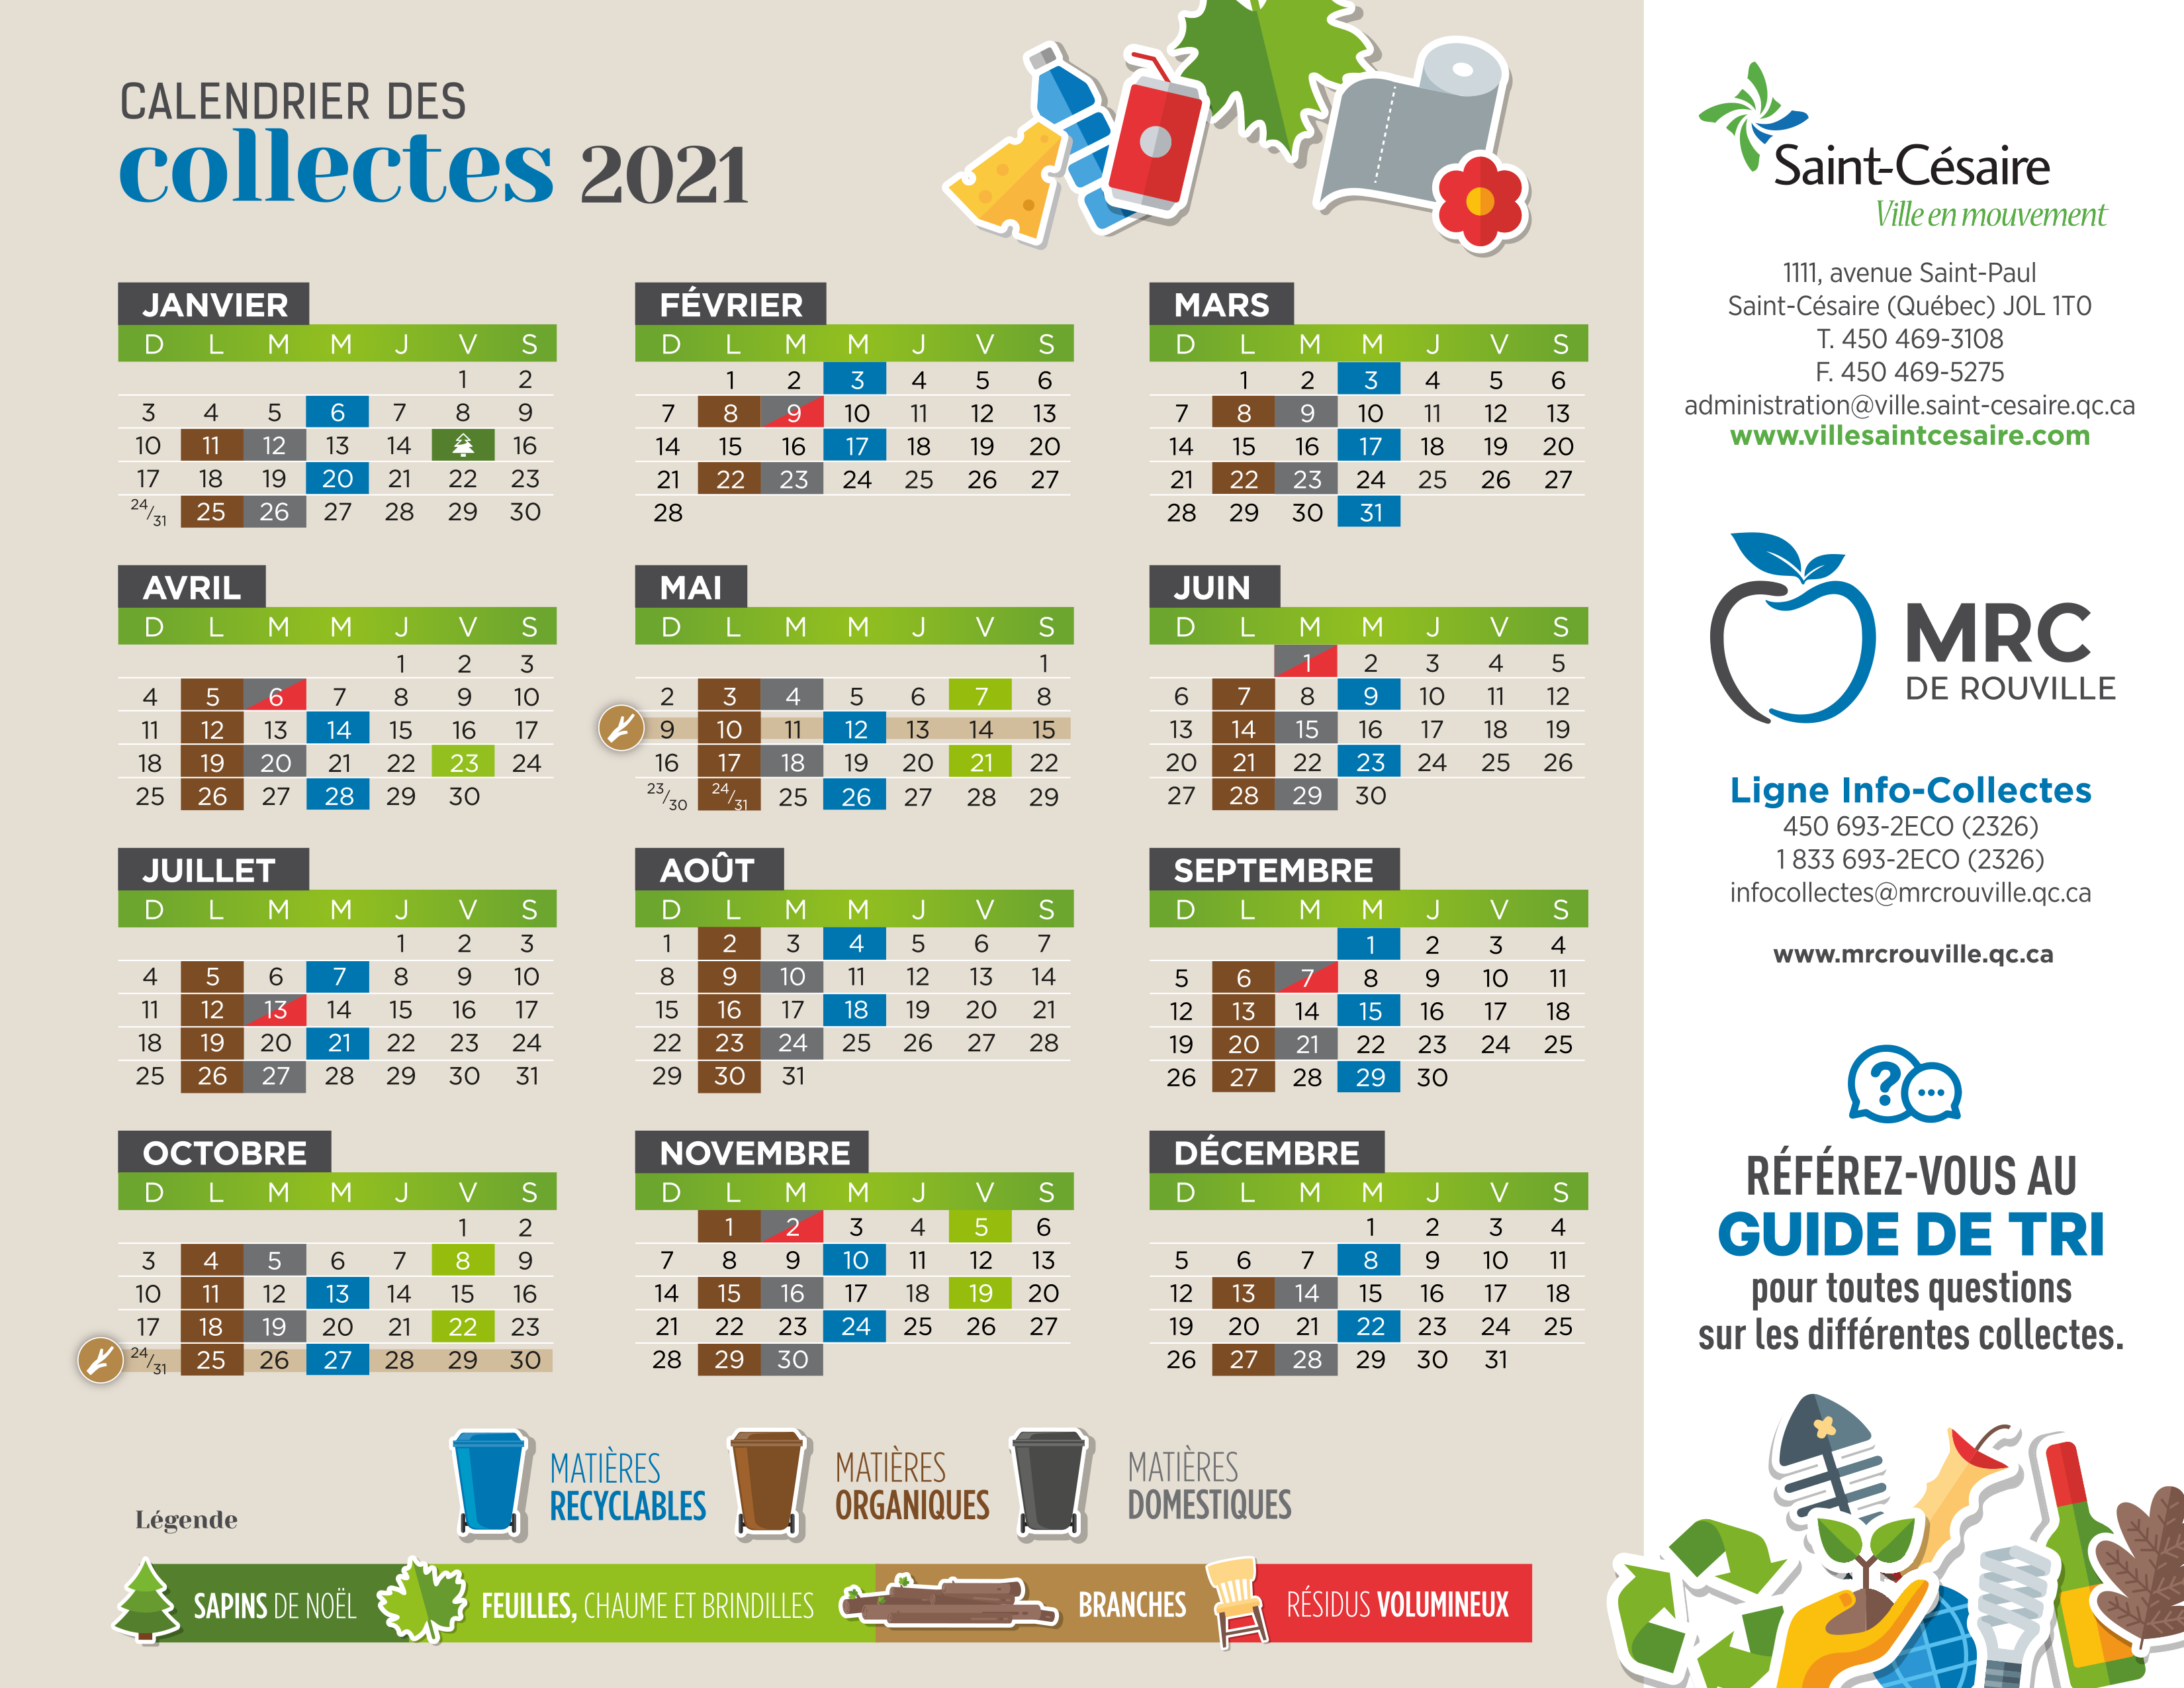 Drawing And Illustration Digital Art And Collectibles Calendrier Des Collectes Pe